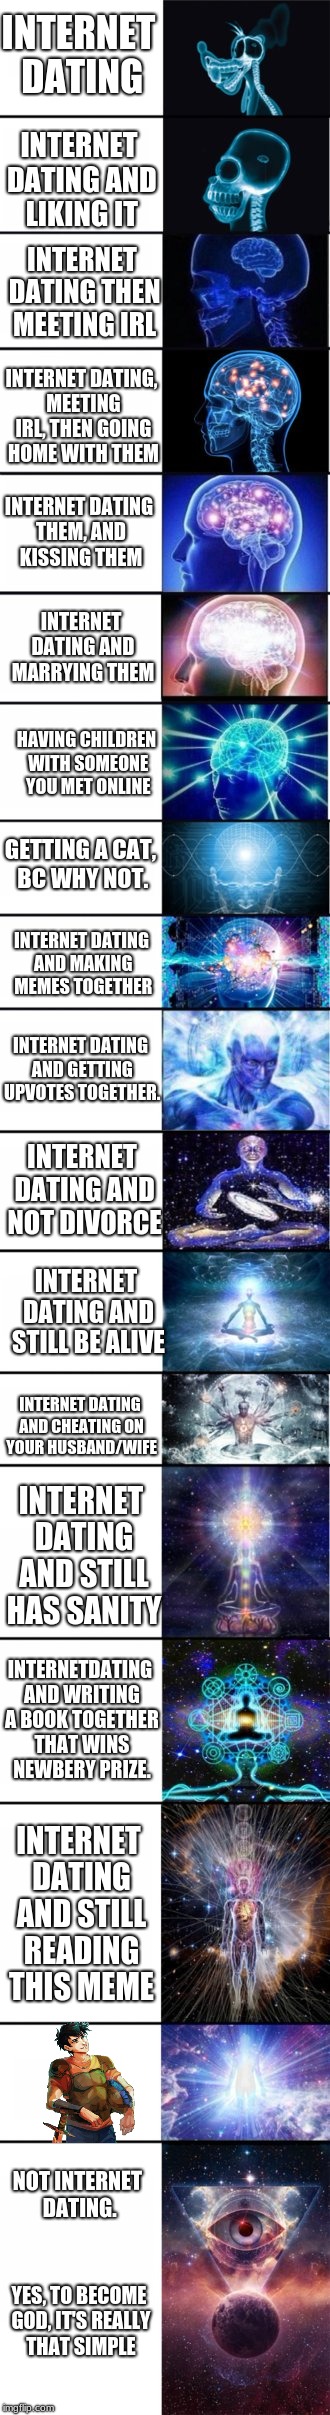 THIS TOOK FOREVER SO I BETTER GET SOME UPVOTES!!! | INTERNET DATING; INTERNET DATING AND LIKING IT; INTERNET DATING THEN MEETING IRL; INTERNET DATING, MEETING IRL, THEN GOING HOME WITH THEM; INTERNET DATING THEM, AND KISSING THEM; INTERNET DATING AND MARRYING THEM; HAVING CHILDREN WITH SOMEONE YOU MET ONLINE; GETTING A CAT, BC WHY NOT. INTERNET DATING AND MAKING MEMES TOGETHER; INTERNET DATING AND GETTING UPVOTES TOGETHER. INTERNET DATING AND NOT DIVORCE; INTERNET DATING AND STILL BE ALIVE; INTERNET DATING AND CHEATING ON YOUR HUSBAND/WIFE; INTERNET DATING AND STILL HAS SANITY; INTERNETDATING AND WRITING A BOOK TOGETHER THAT WINS NEWBERY PRIZE. INTERNET DATING AND STILL READING THIS MEME; IDK WUT TO PUT FOR THIS ONE. NOT INTERNET DATING. YES, TO BECOME GOD, IT'S REALLY THAT SIMPLE | image tagged in memes,funny,expanding brain extended 2 | made w/ Imgflip meme maker